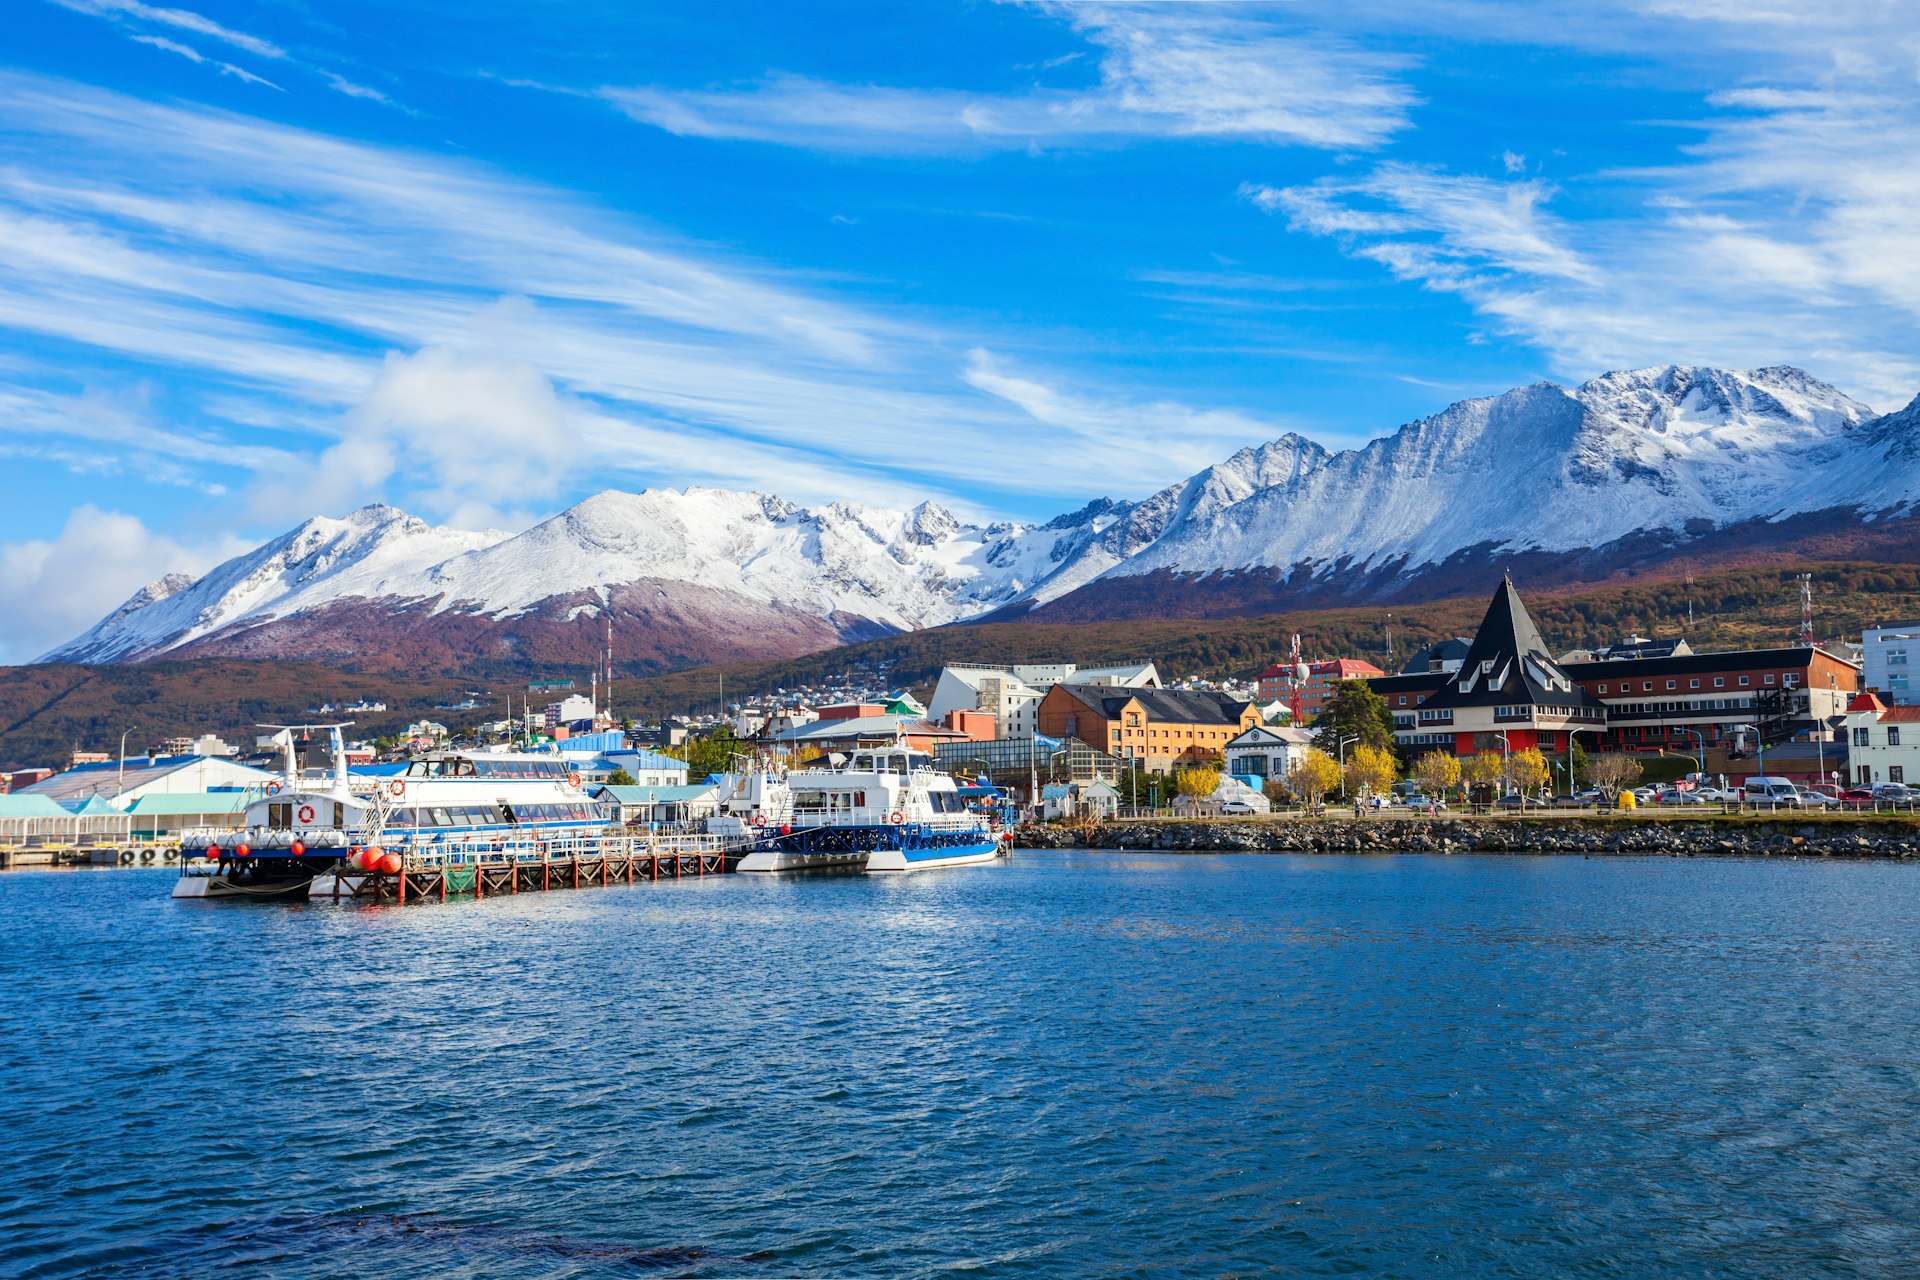 Boats in the harbor of Ushuaia, Argentina, with snow-capped peaks in the distance